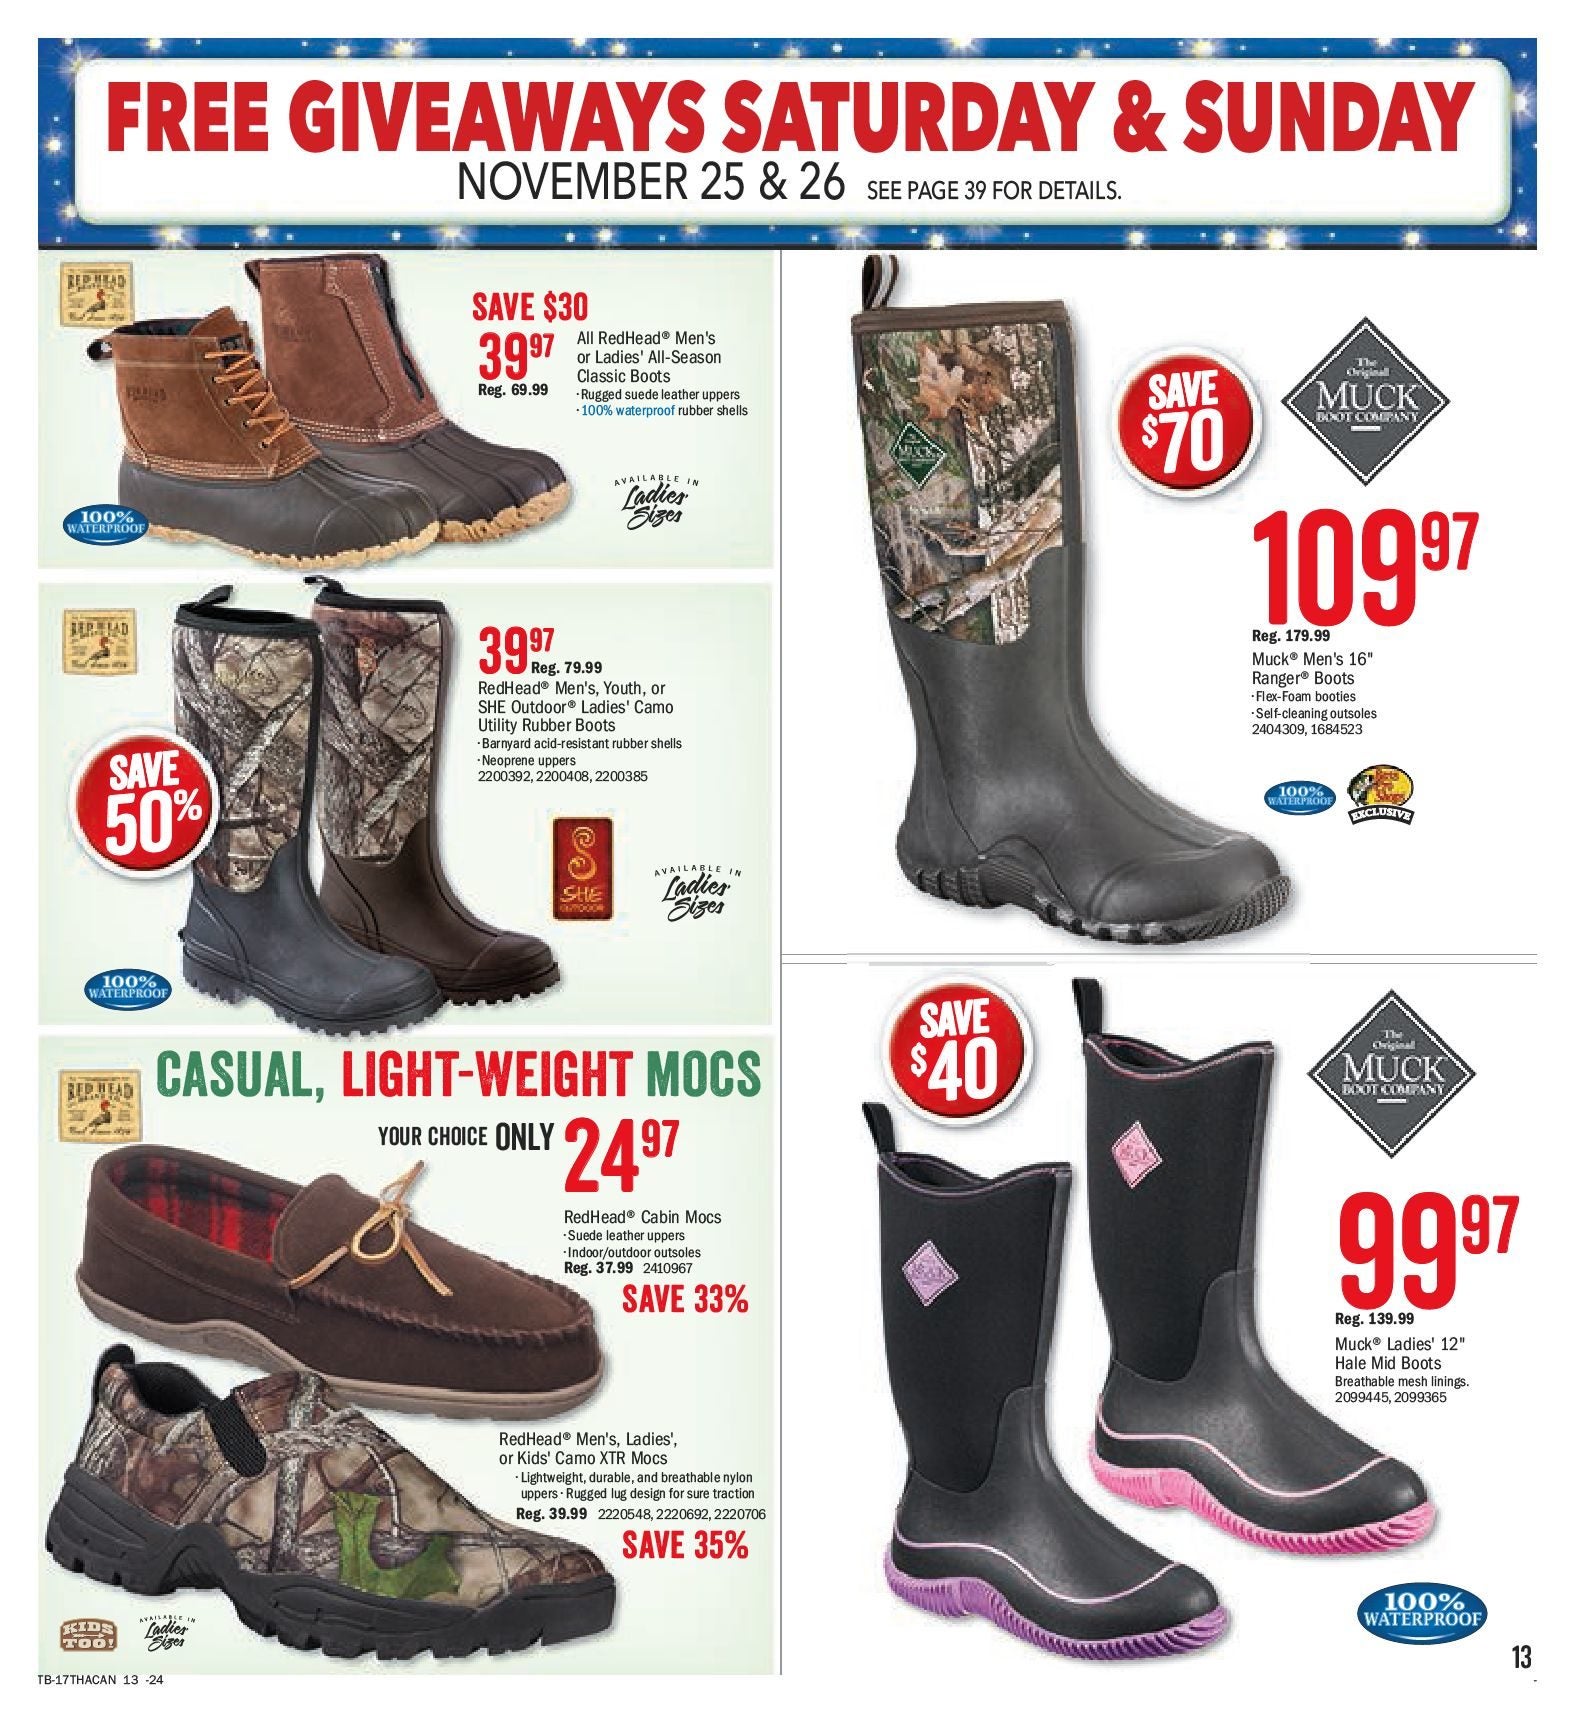 redhead workhorse boots Shop Clothing 